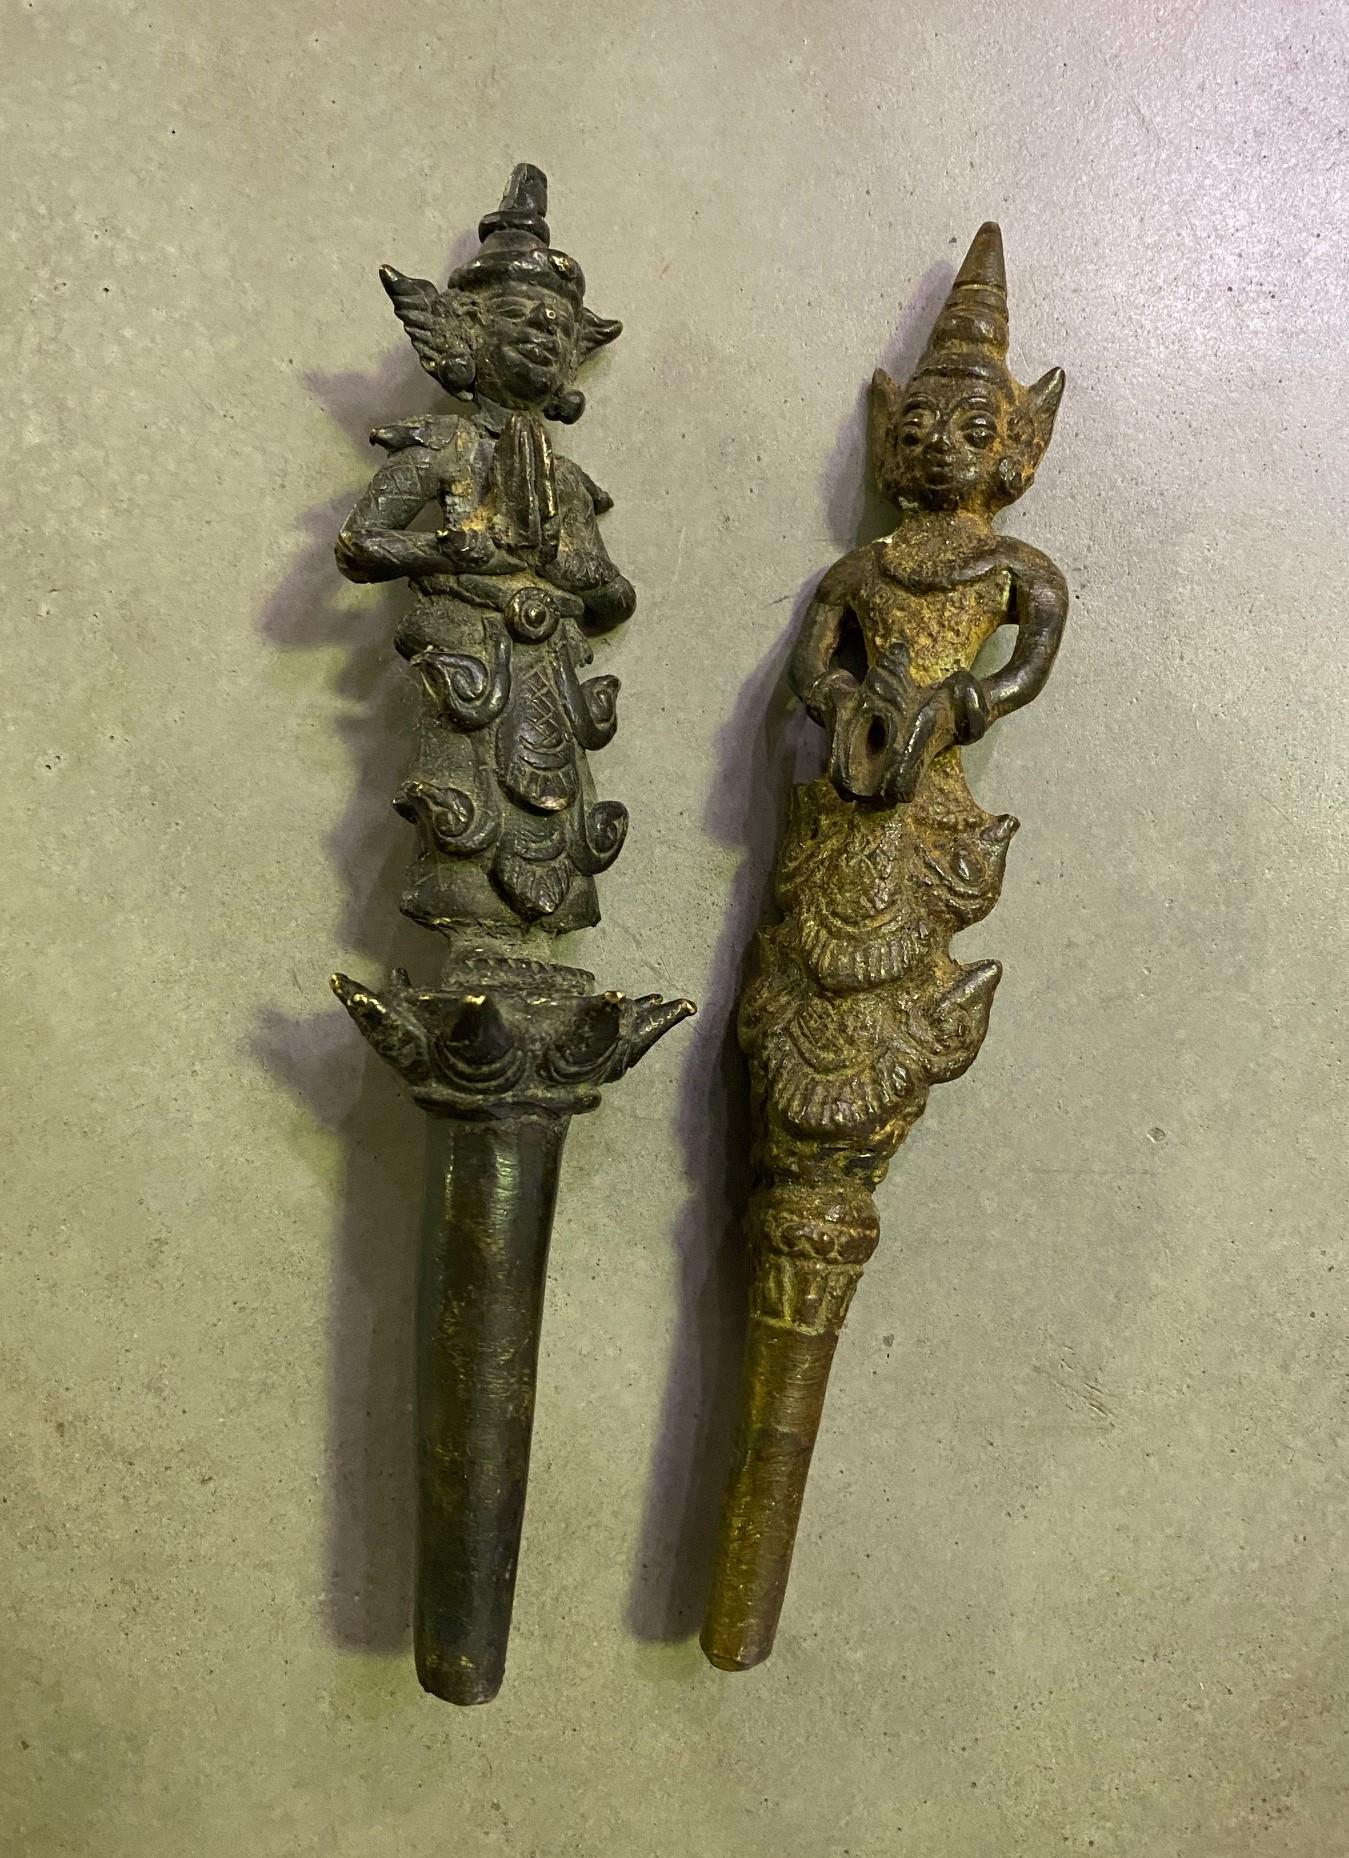 A very interesting pair of praying/ offering figures. We are not quite sure what they were used for but they have some age and are quite heavy and solid for their sizes. We believe they are from Tibet/Northern Nepal. 

Was acquired from a